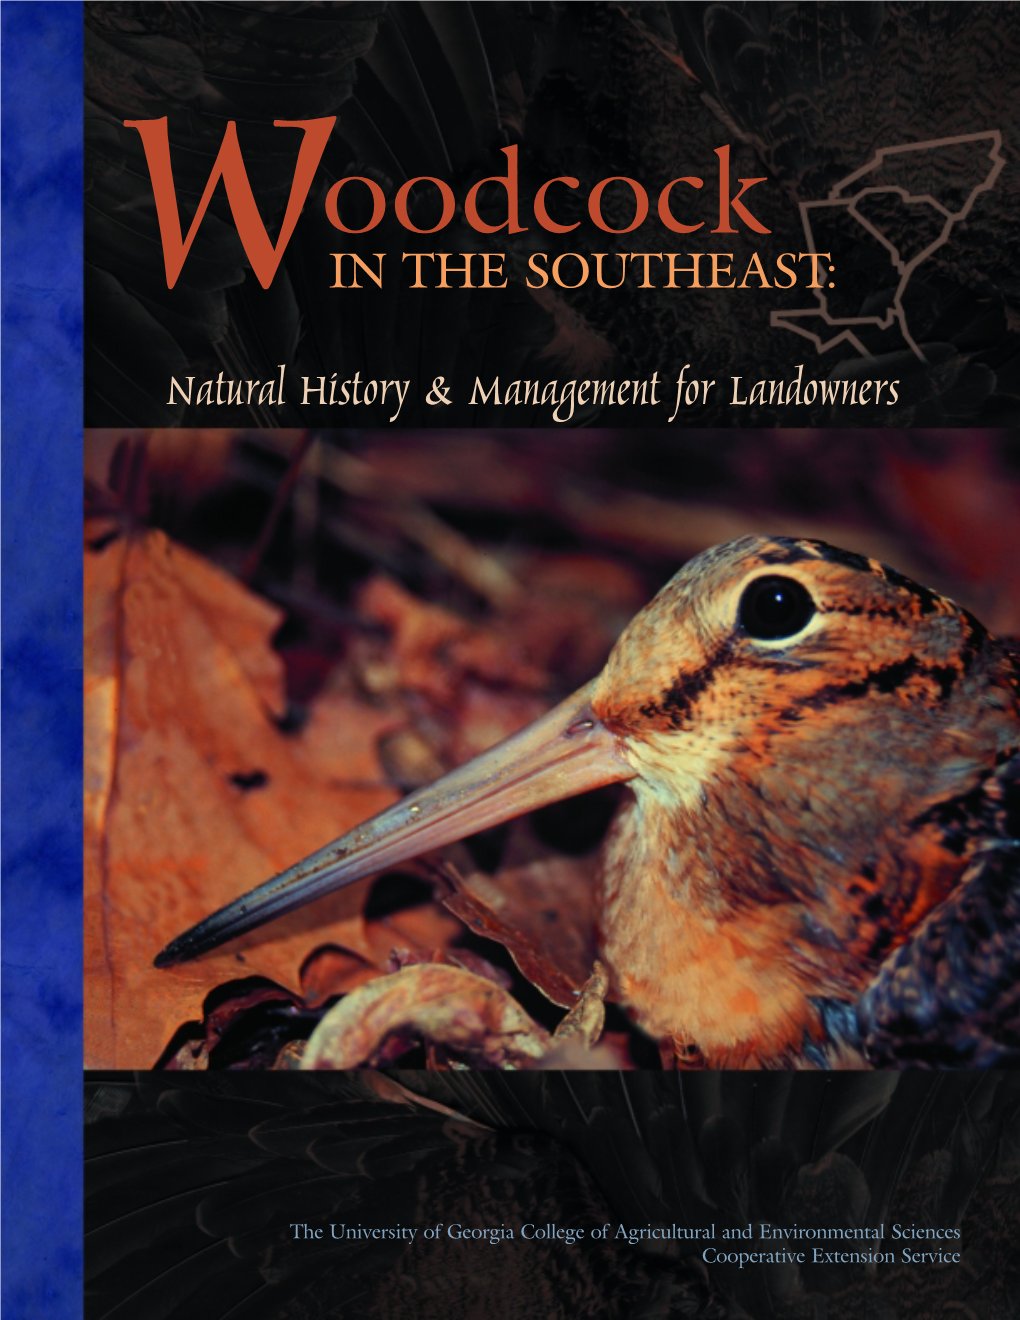 Woodcock in the SOUTHEAST